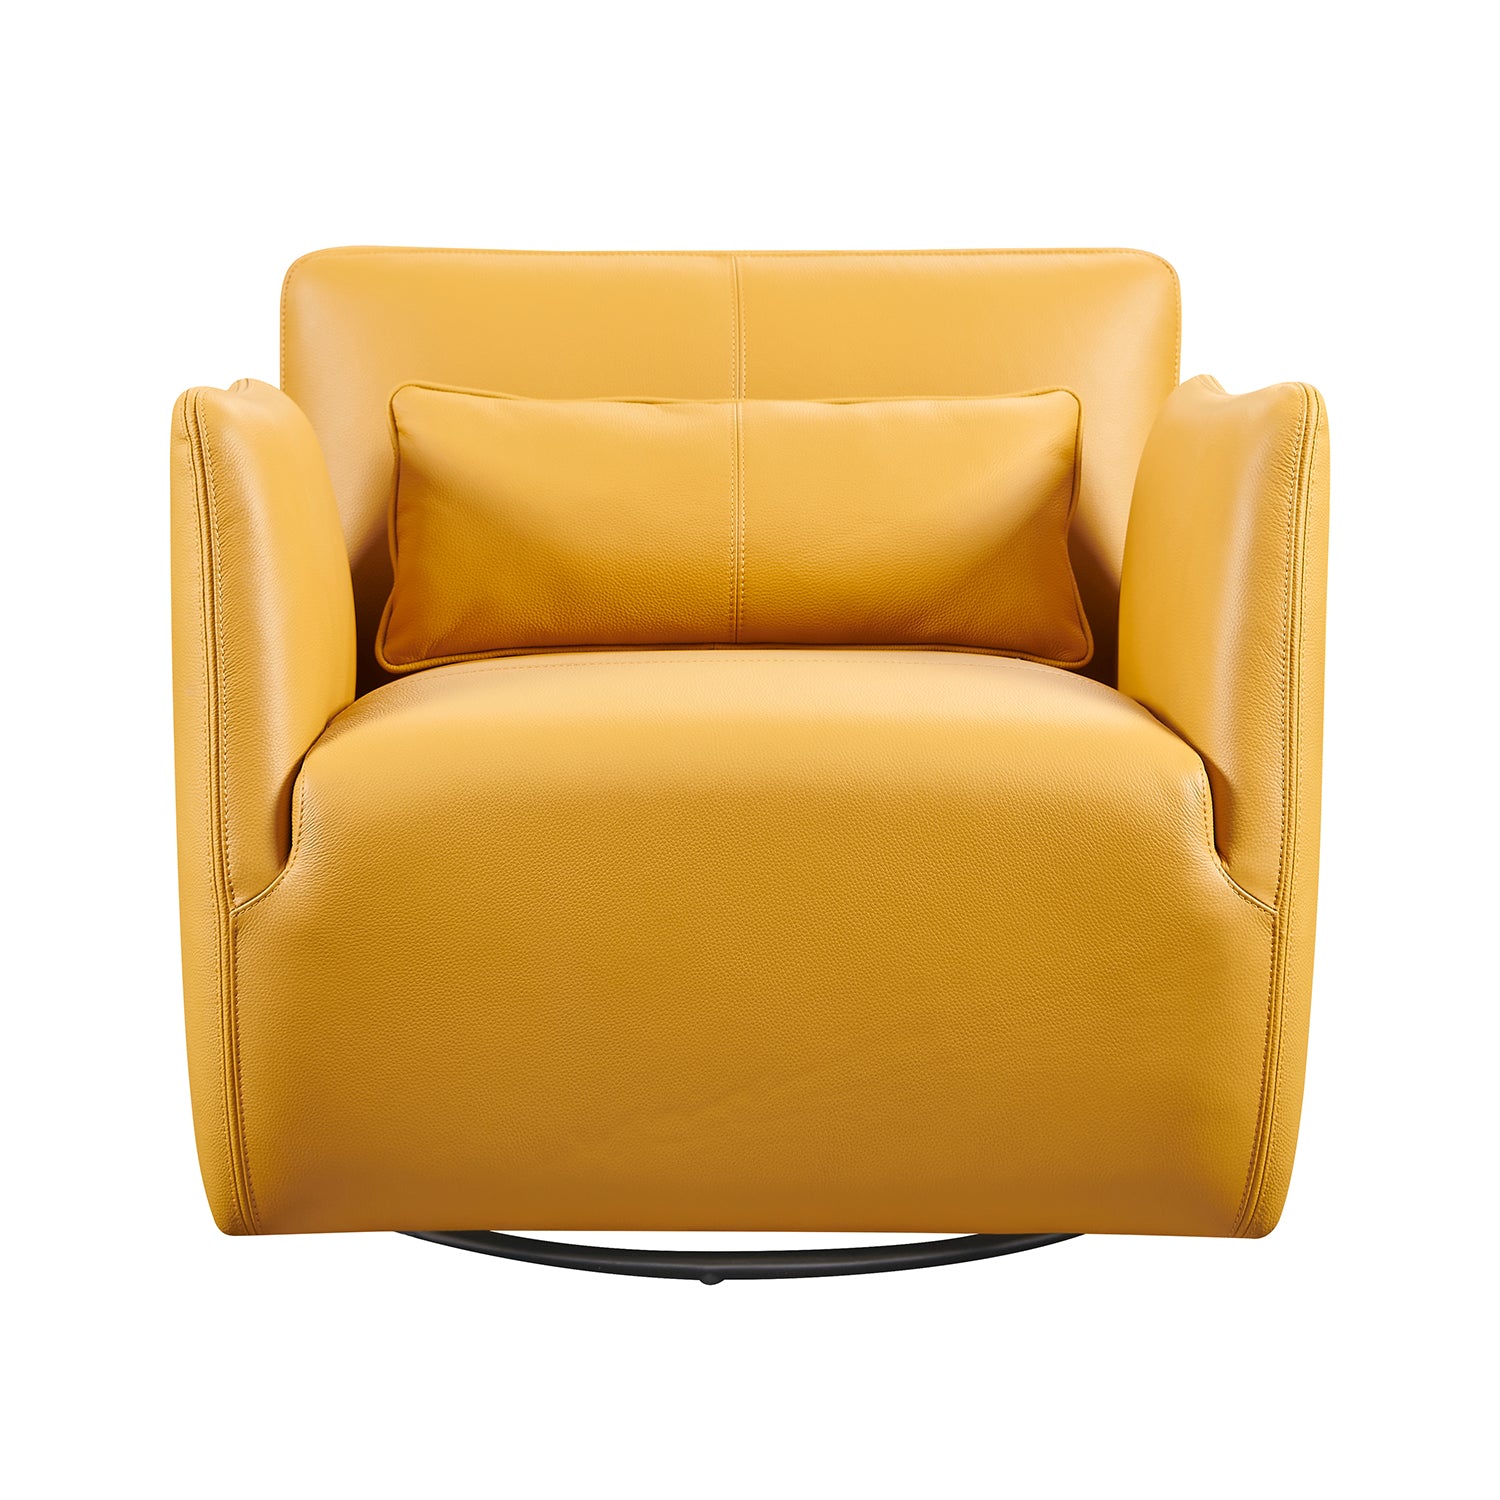 Chair COC1 - 003